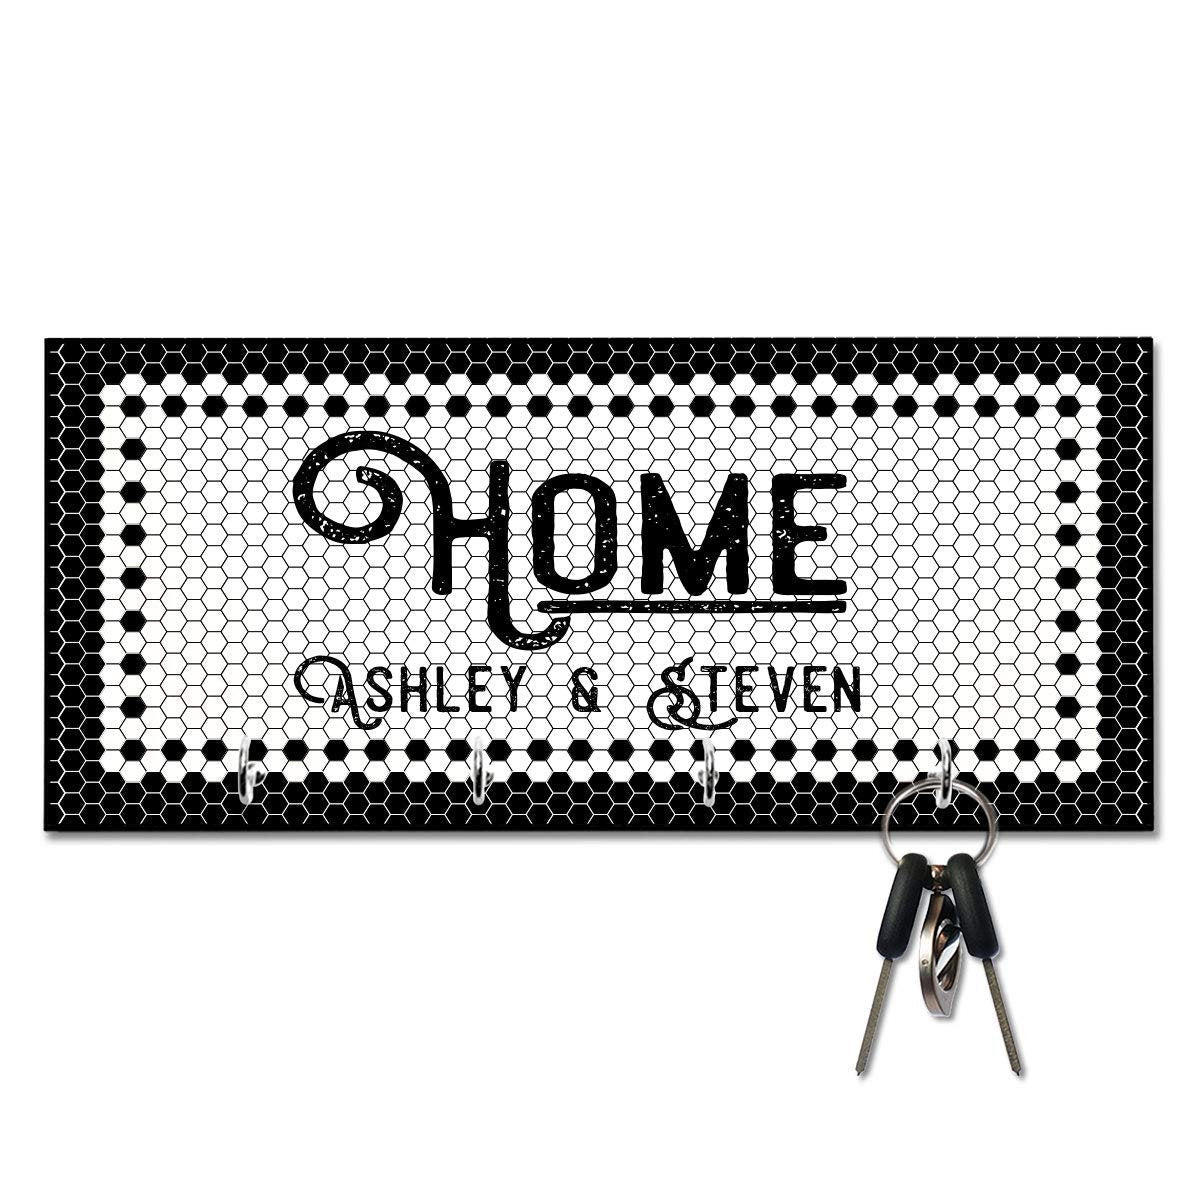 Personallized Black and White Tile Look - Home - Key Hanger